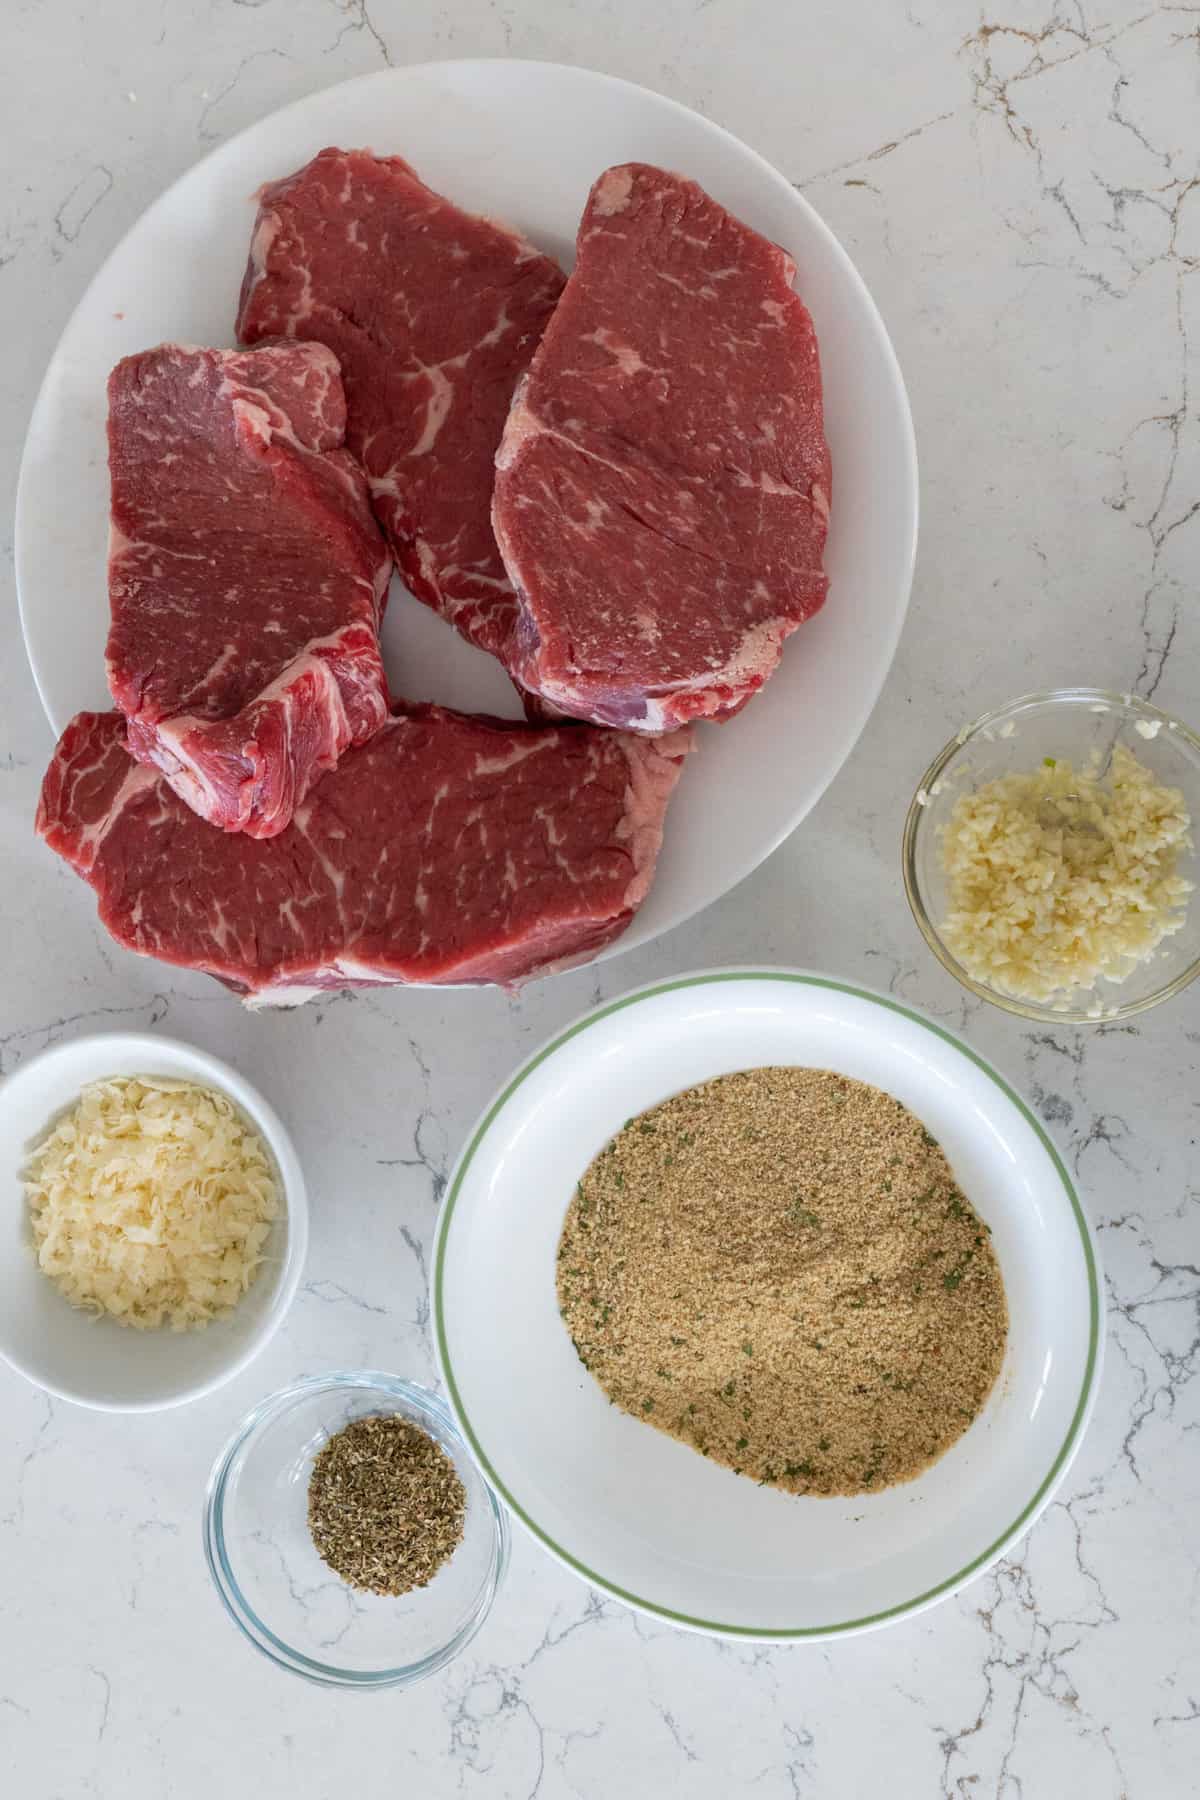 This Italian Steak Recipe is made with shell steaks, olive oil, garlic cloves, dried bread crumbs, parmesan, dried oregano and broiled.